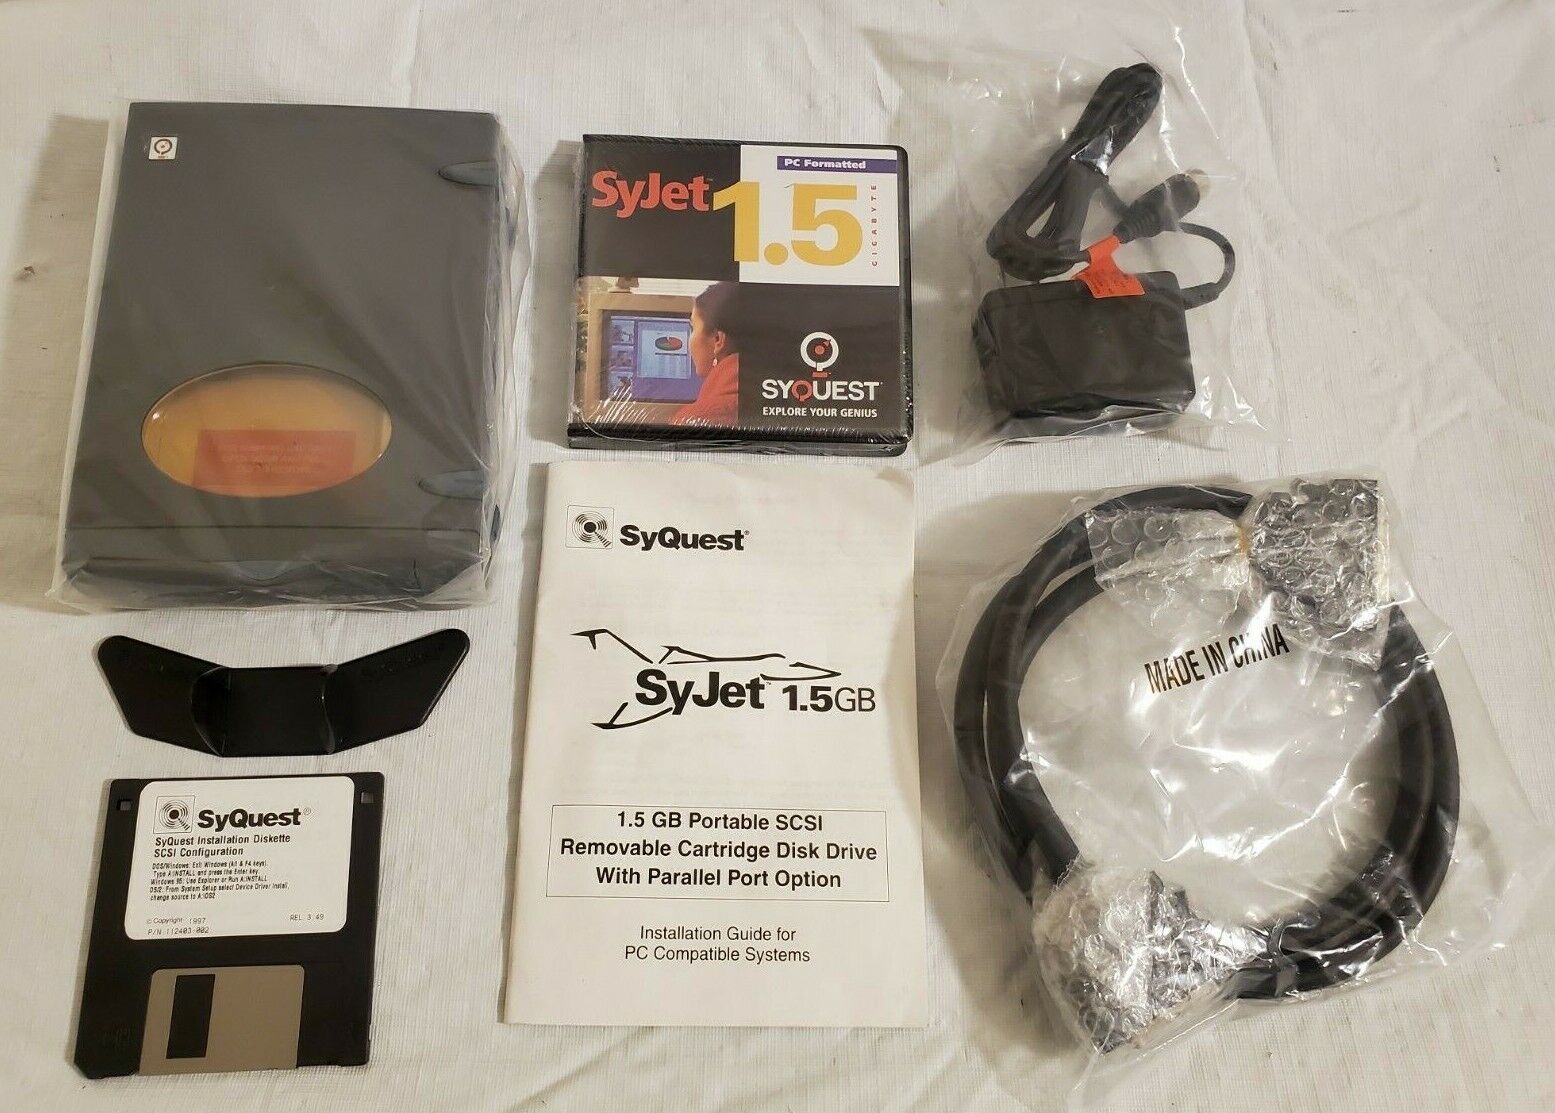 Syquest SyJet 1.5GB SCSI/Parallel Port Removable Cartridge Disc Drive NEVER USED